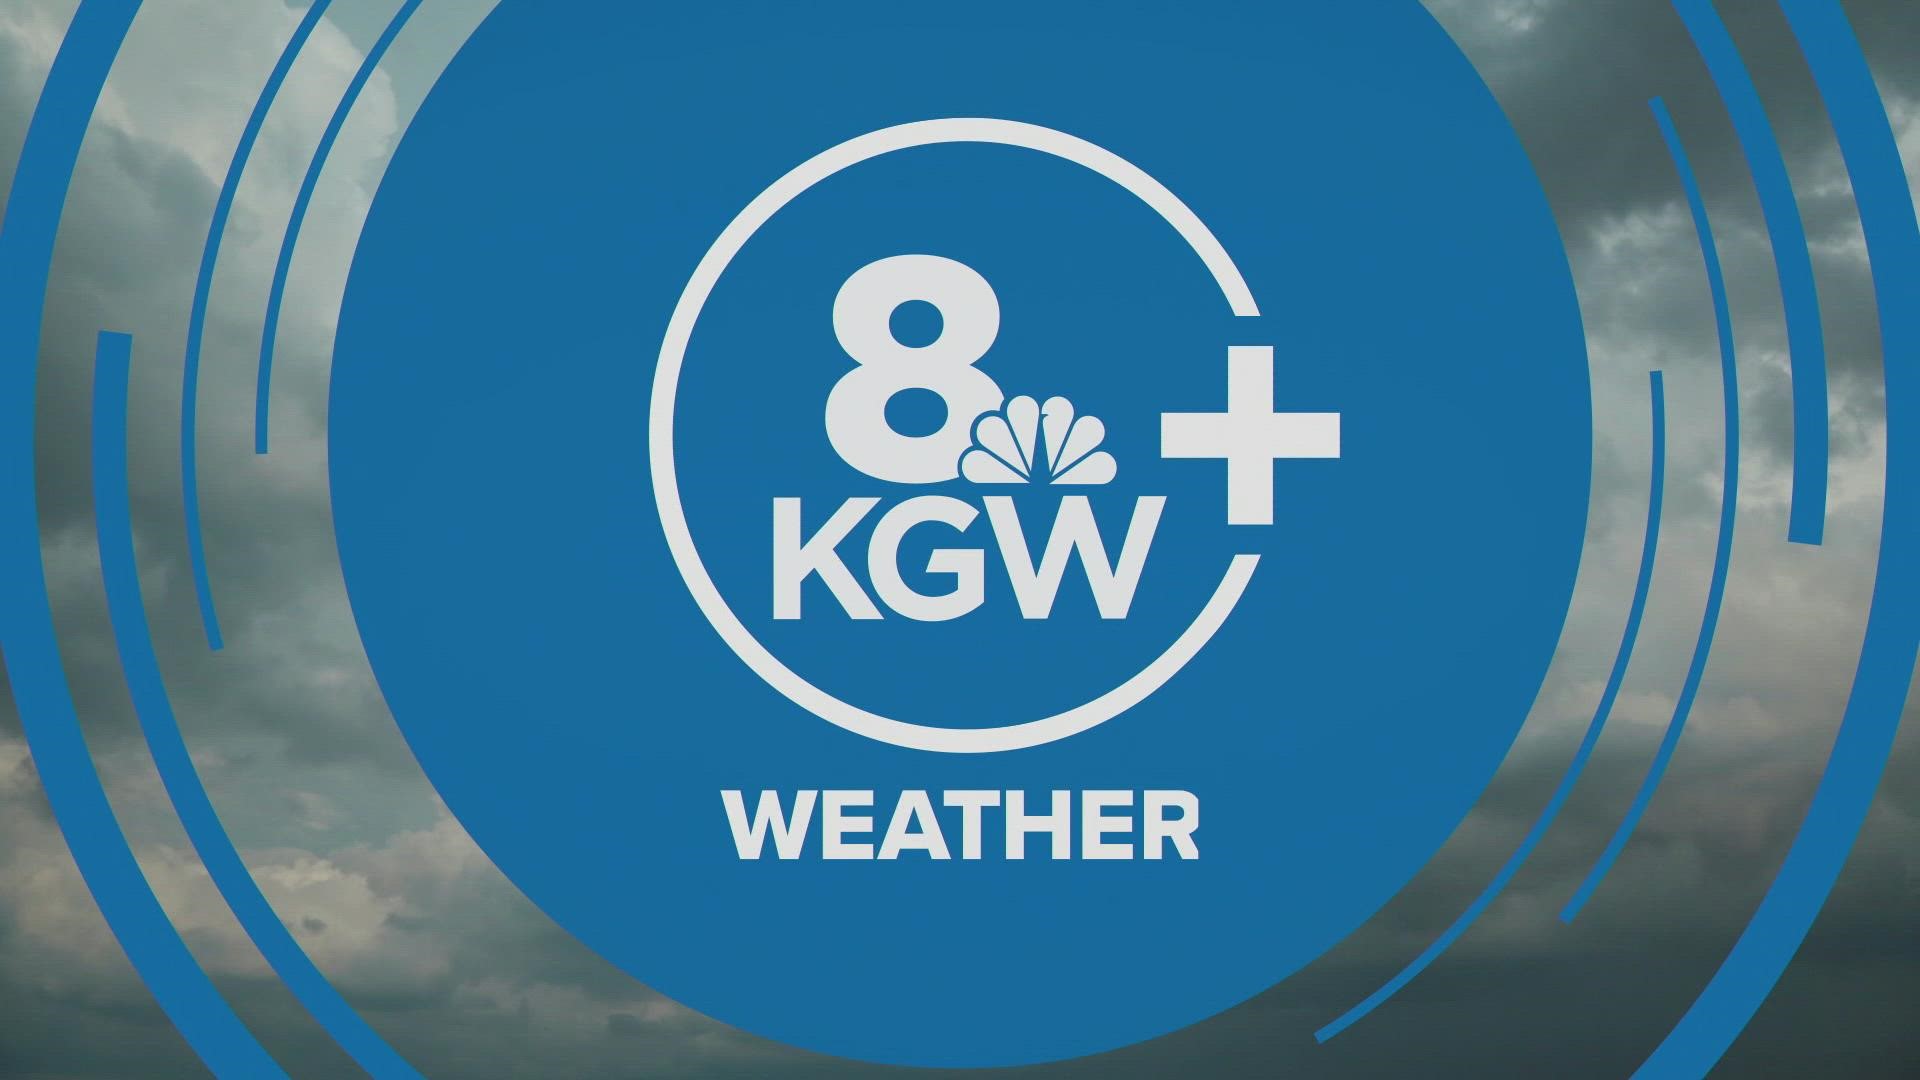 KGW meteorologist Rod Hill discusses the chance of rain on the July Fourth weekend.